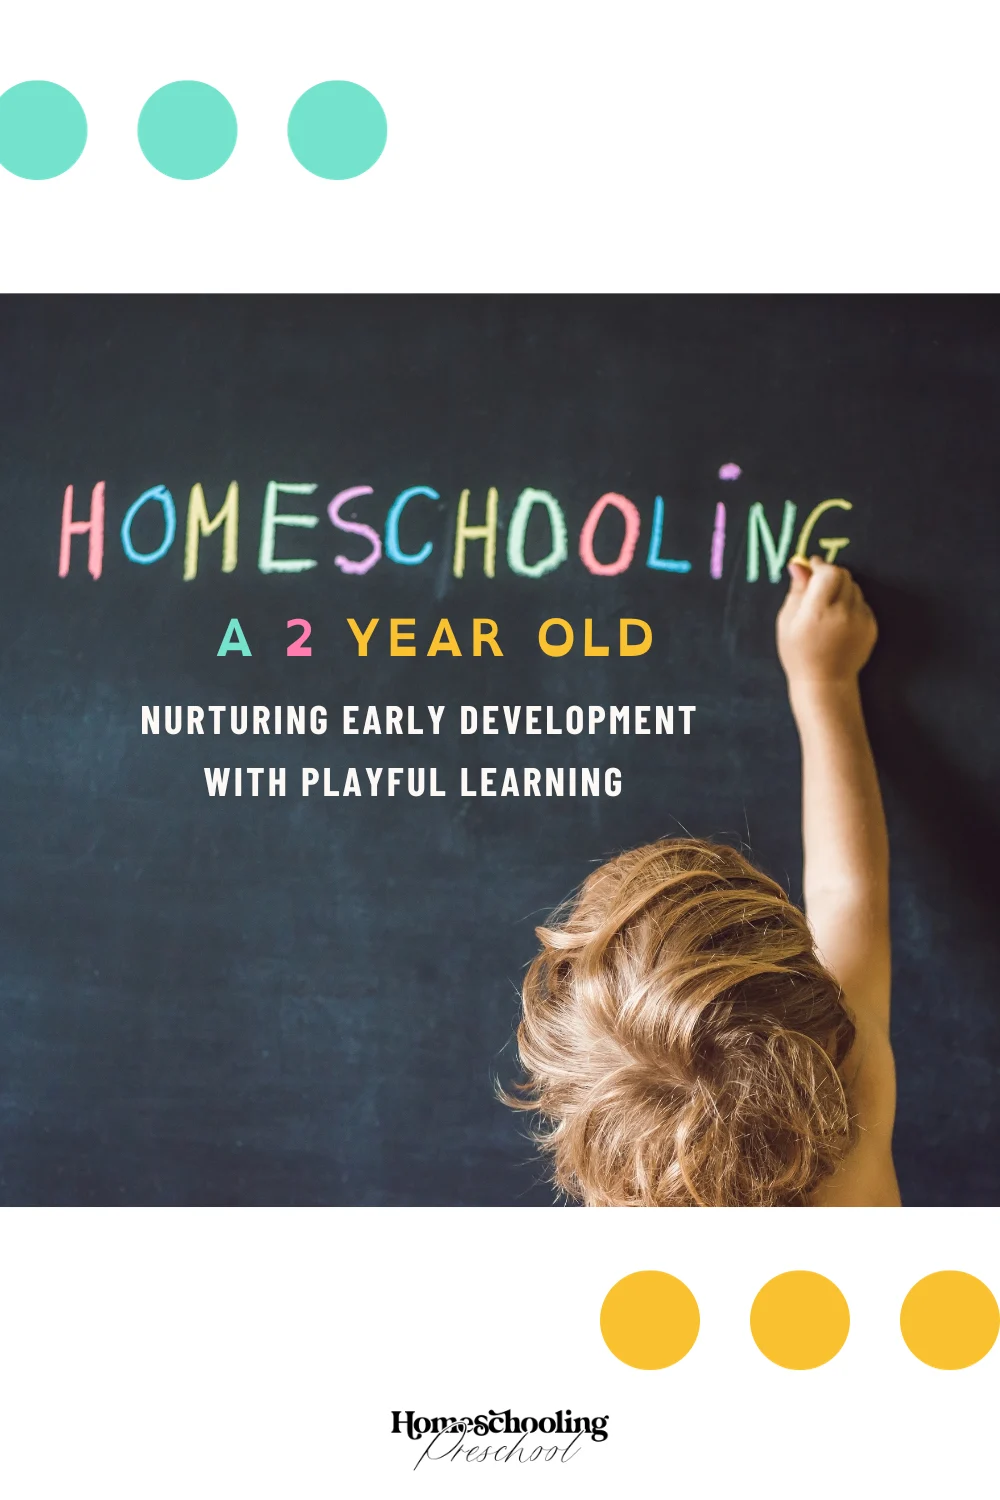 Homeschooling a 2 Year Old: Nurturing Early Development with Playful Learning